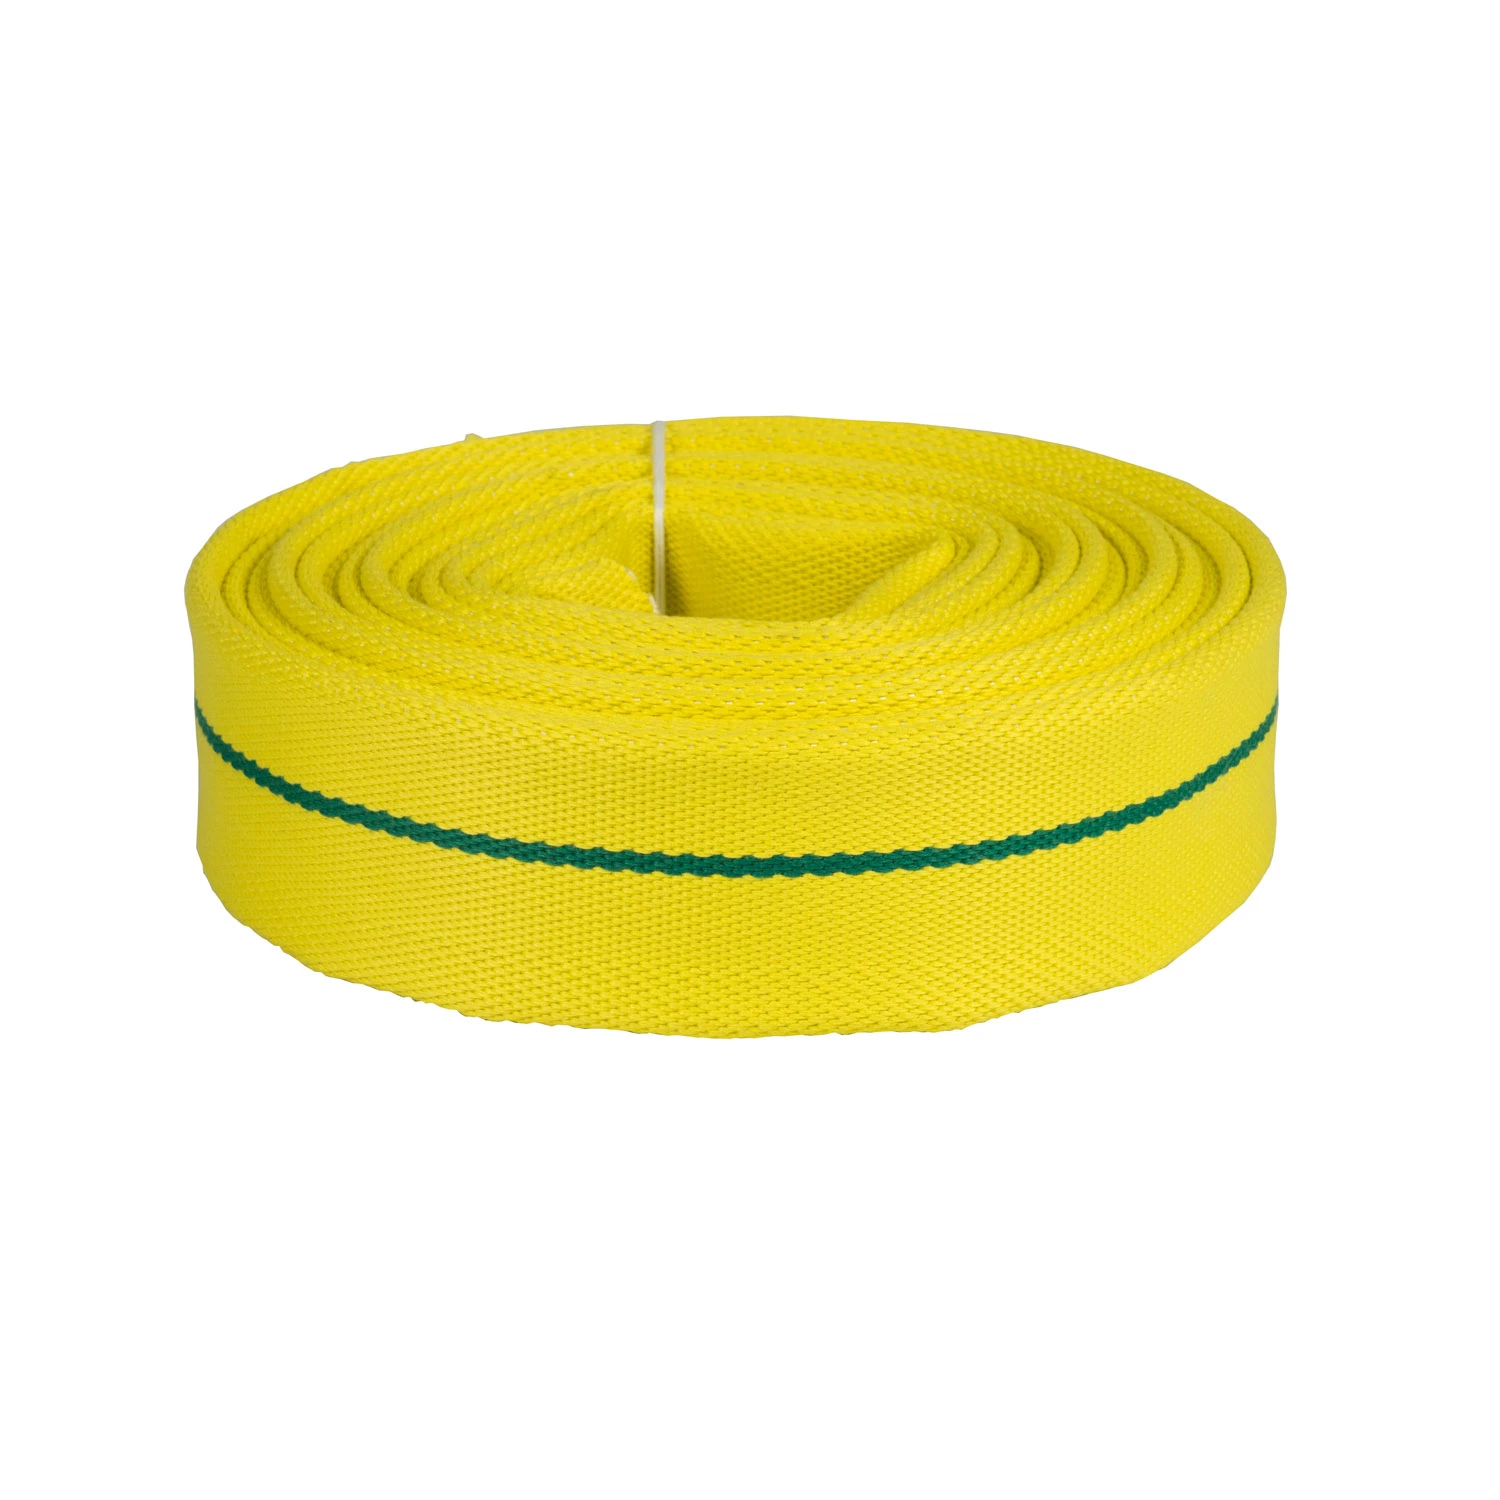 PVC/Rubber Lining Single / Double Jacket Canvas Fire Hose Price